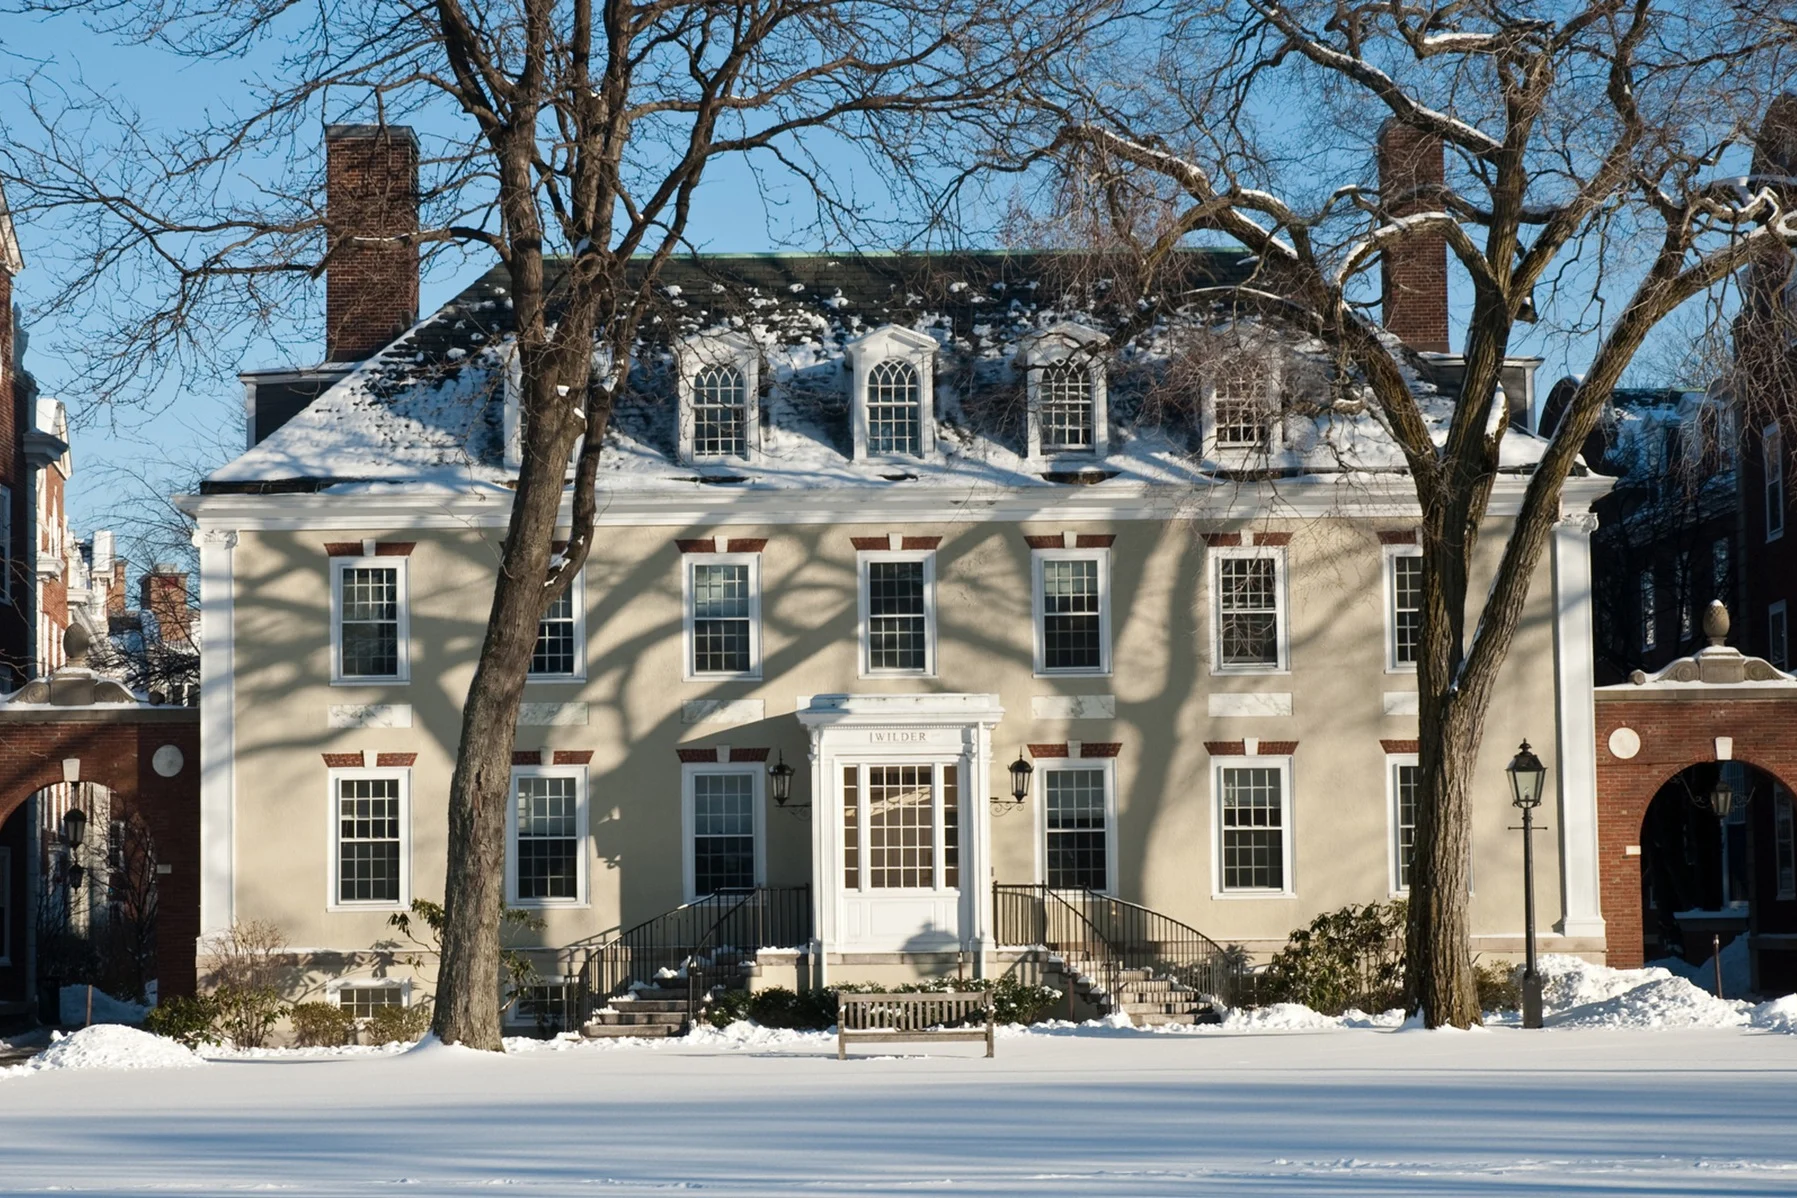 Wilder House in the snow